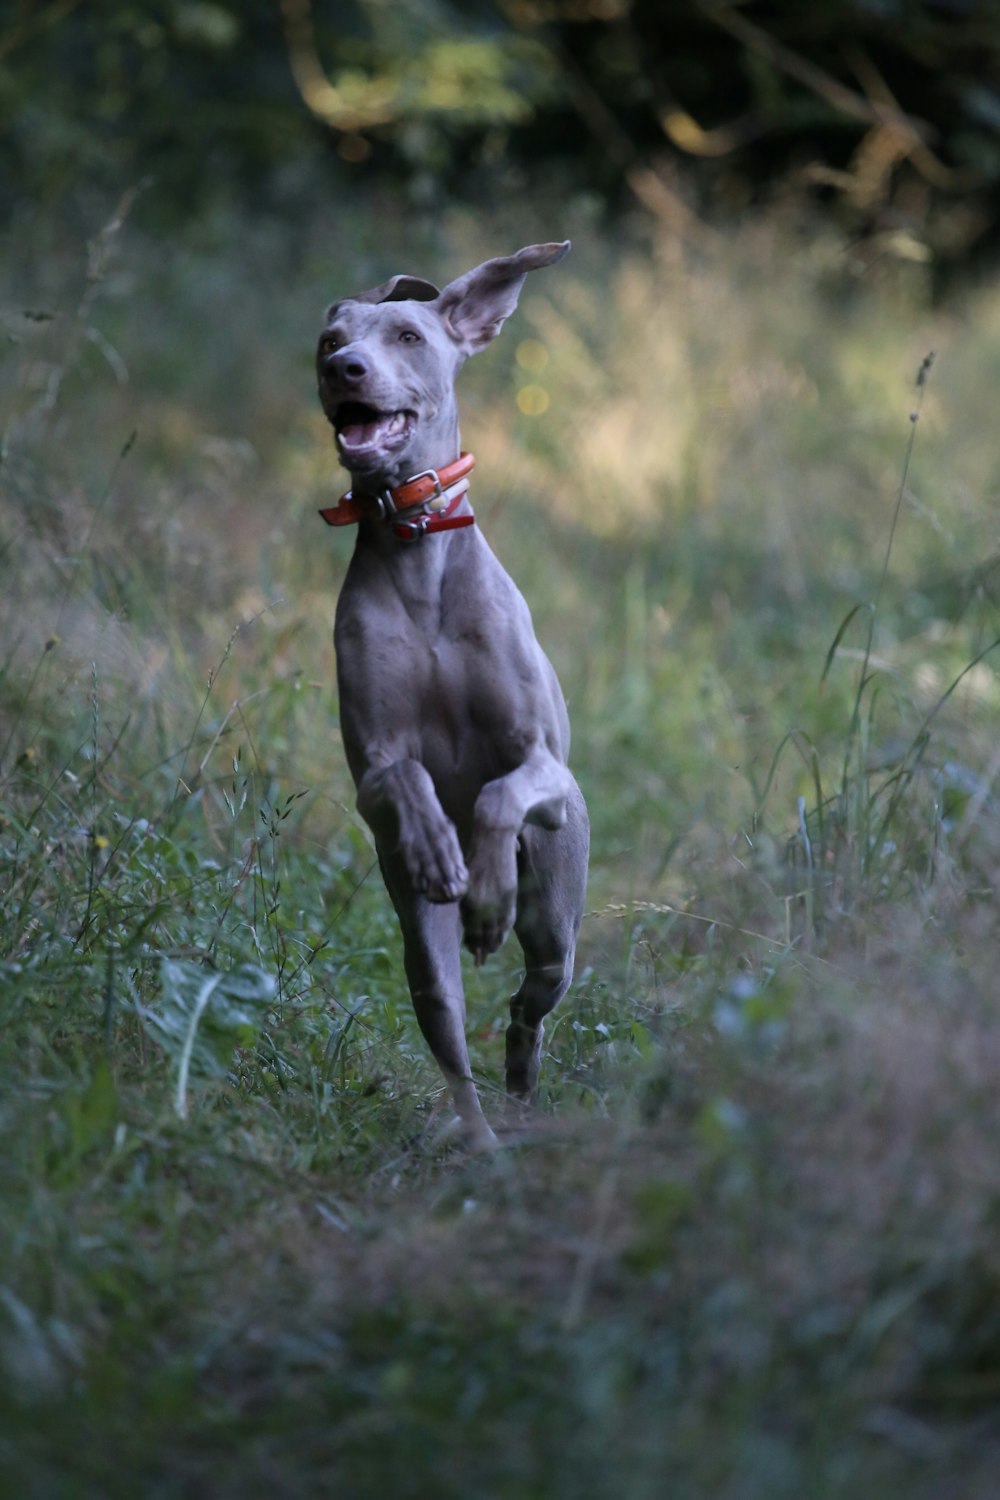 gray dog with red collar running on green grass